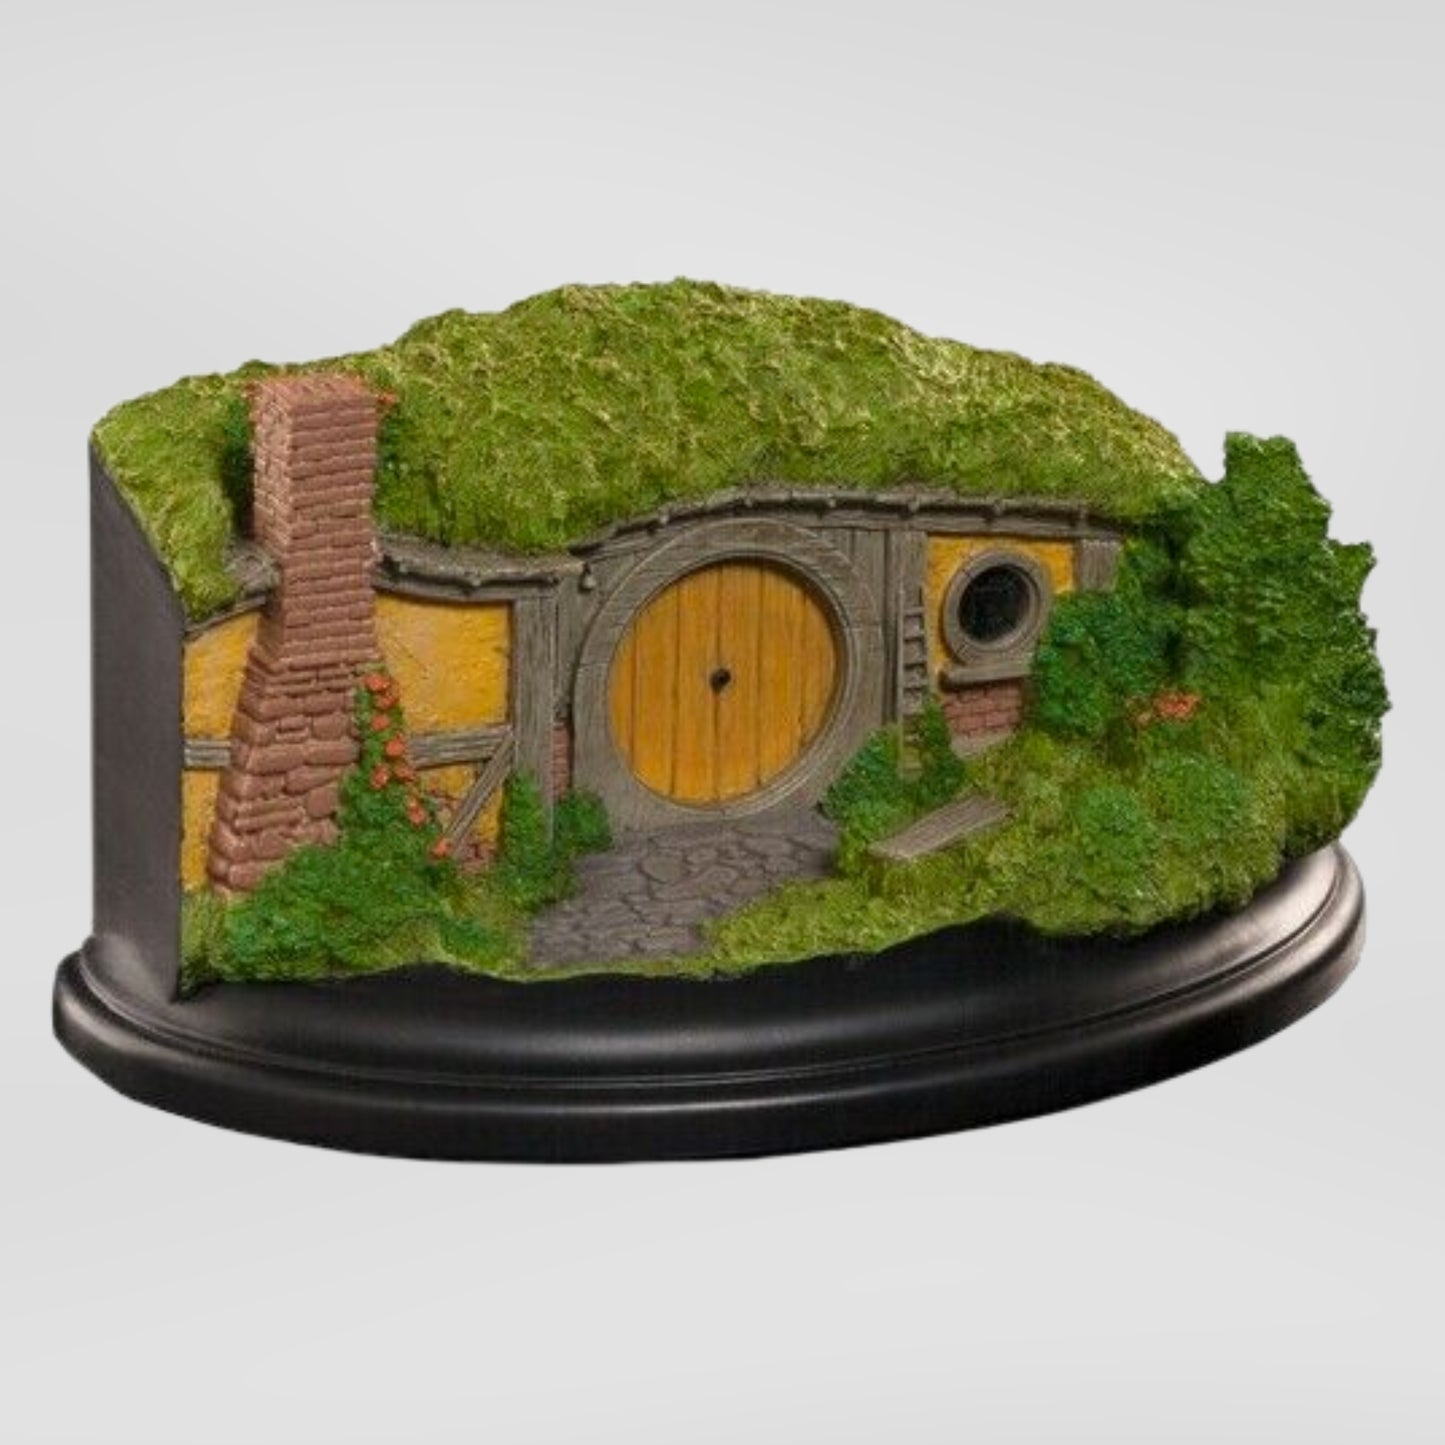 Hobbit Hole (The Smial of Samwise Gamgee) Lord of the Rings Miniature Statue by Weta Workshop